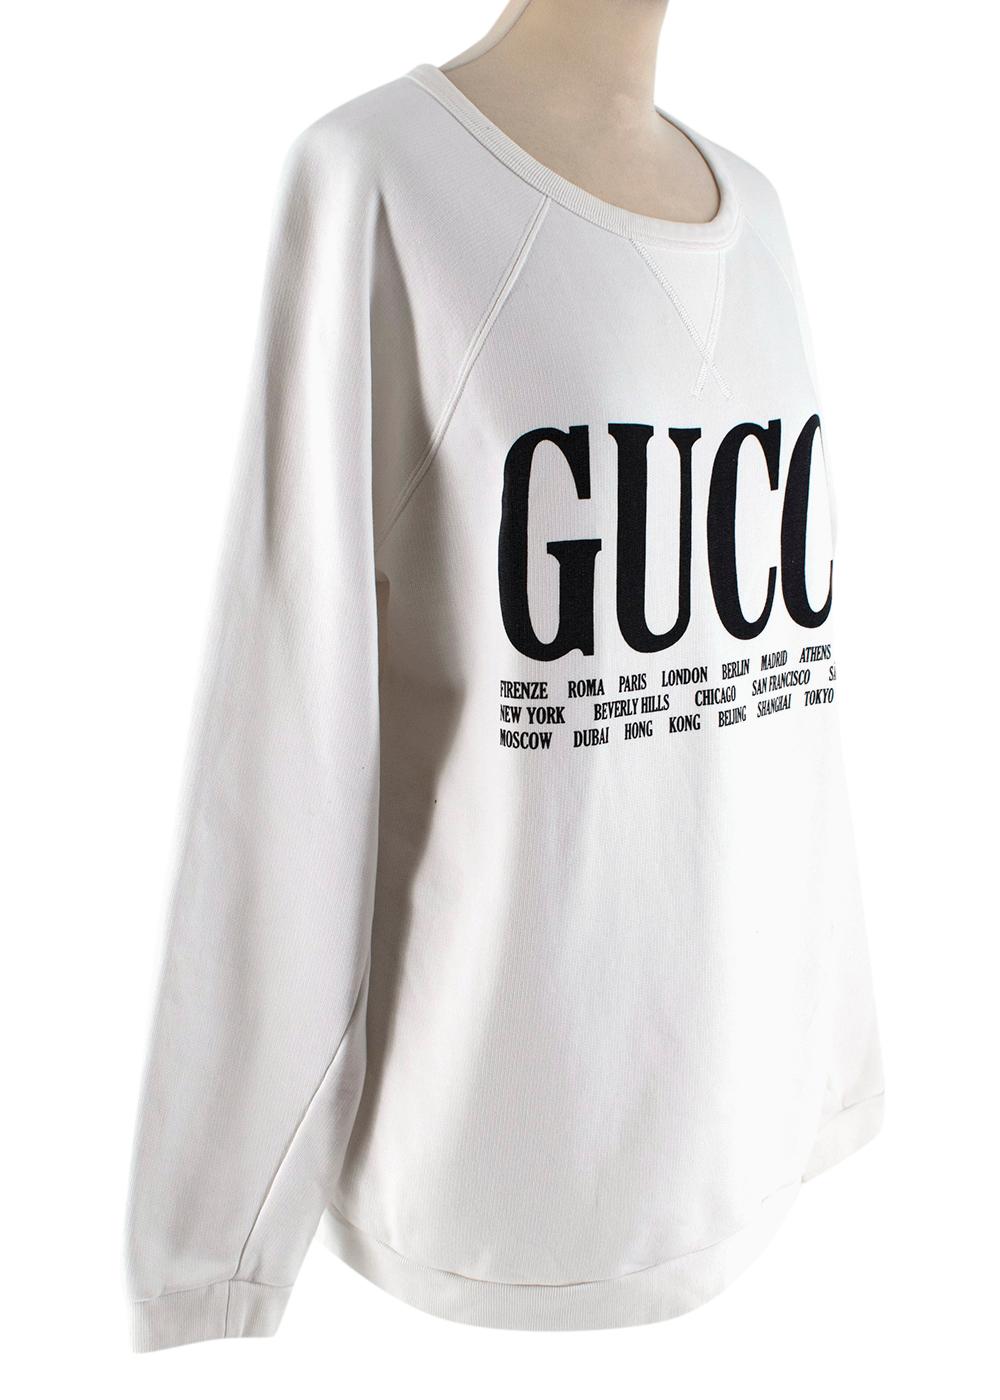 Gucci Cotton Cities Sweatshirt

- Gucci printed logo in large with list of cities 